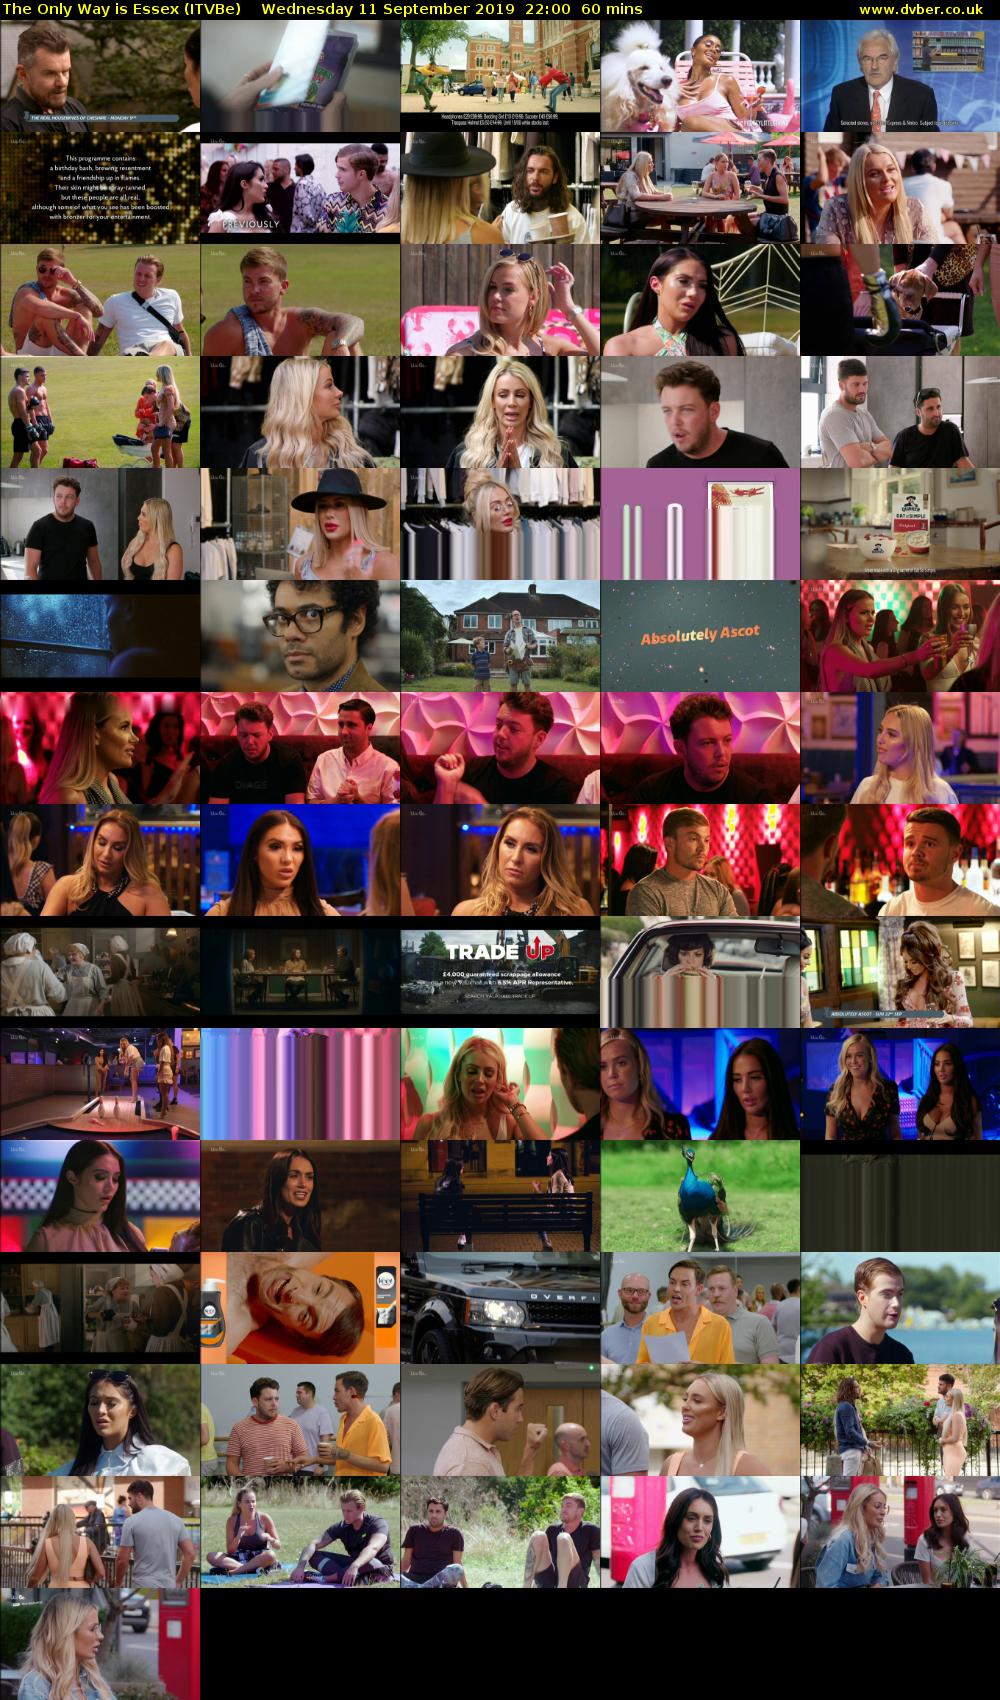 The Only Way is Essex (ITVBe) Wednesday 11 September 2019 22:00 - 23:00